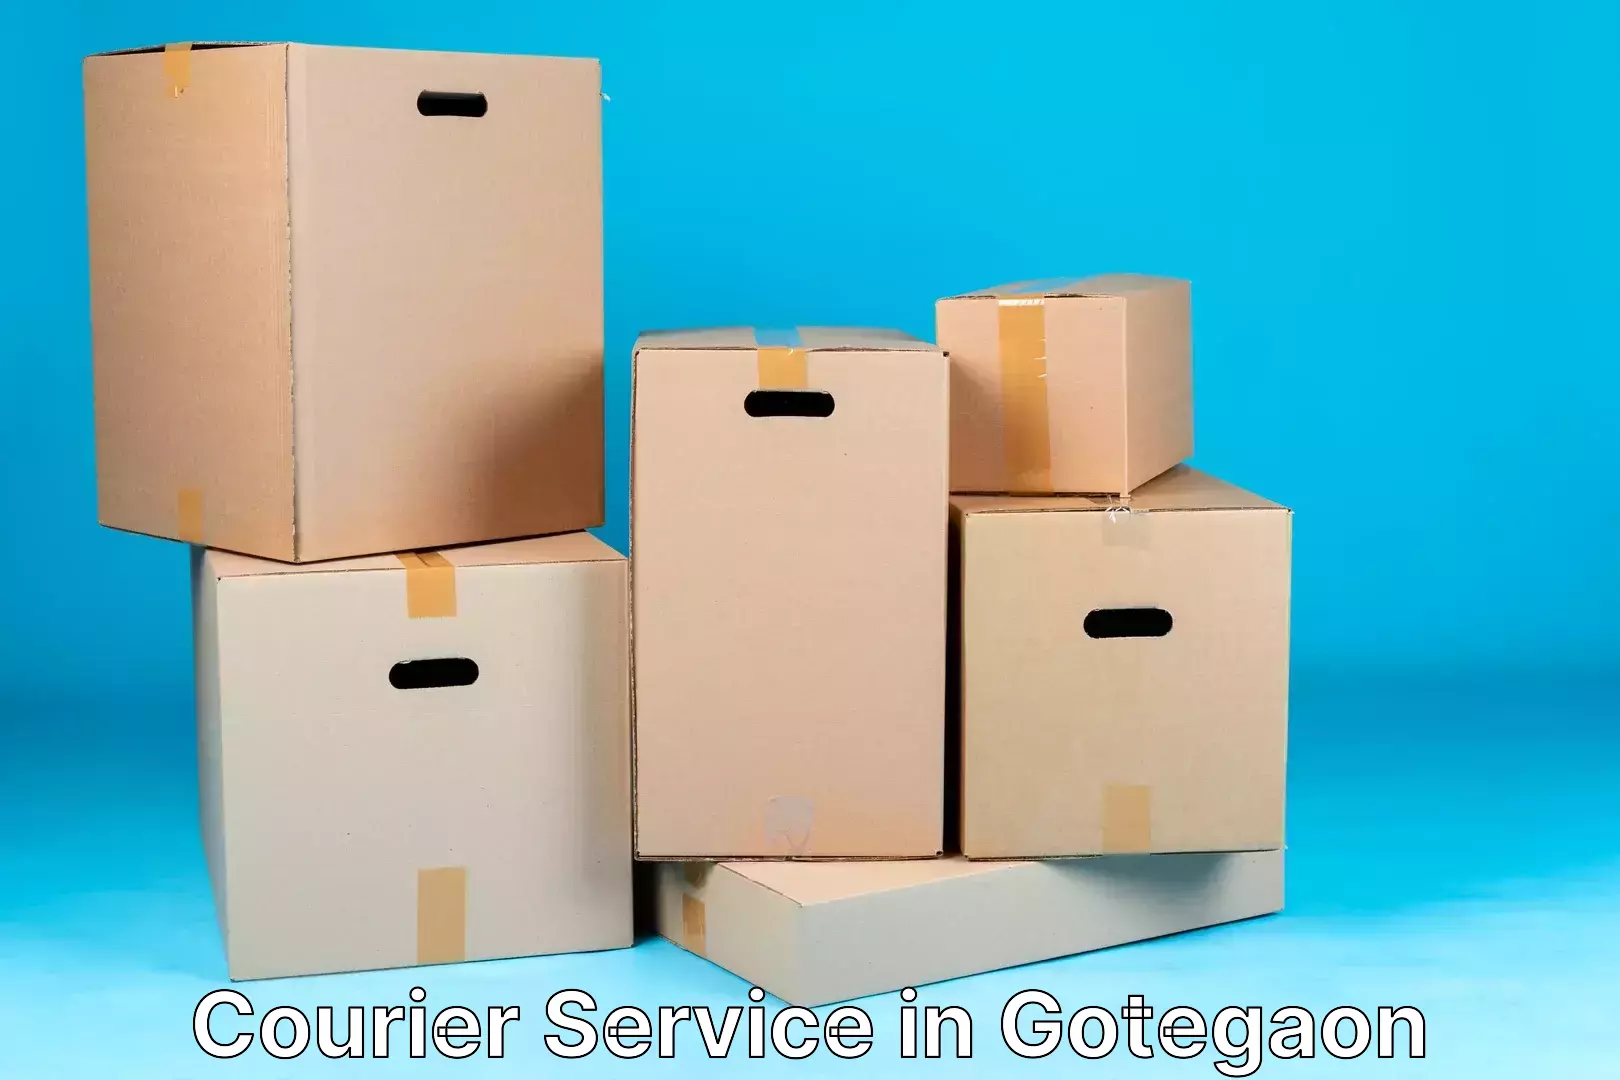 Residential courier service in Gotegaon